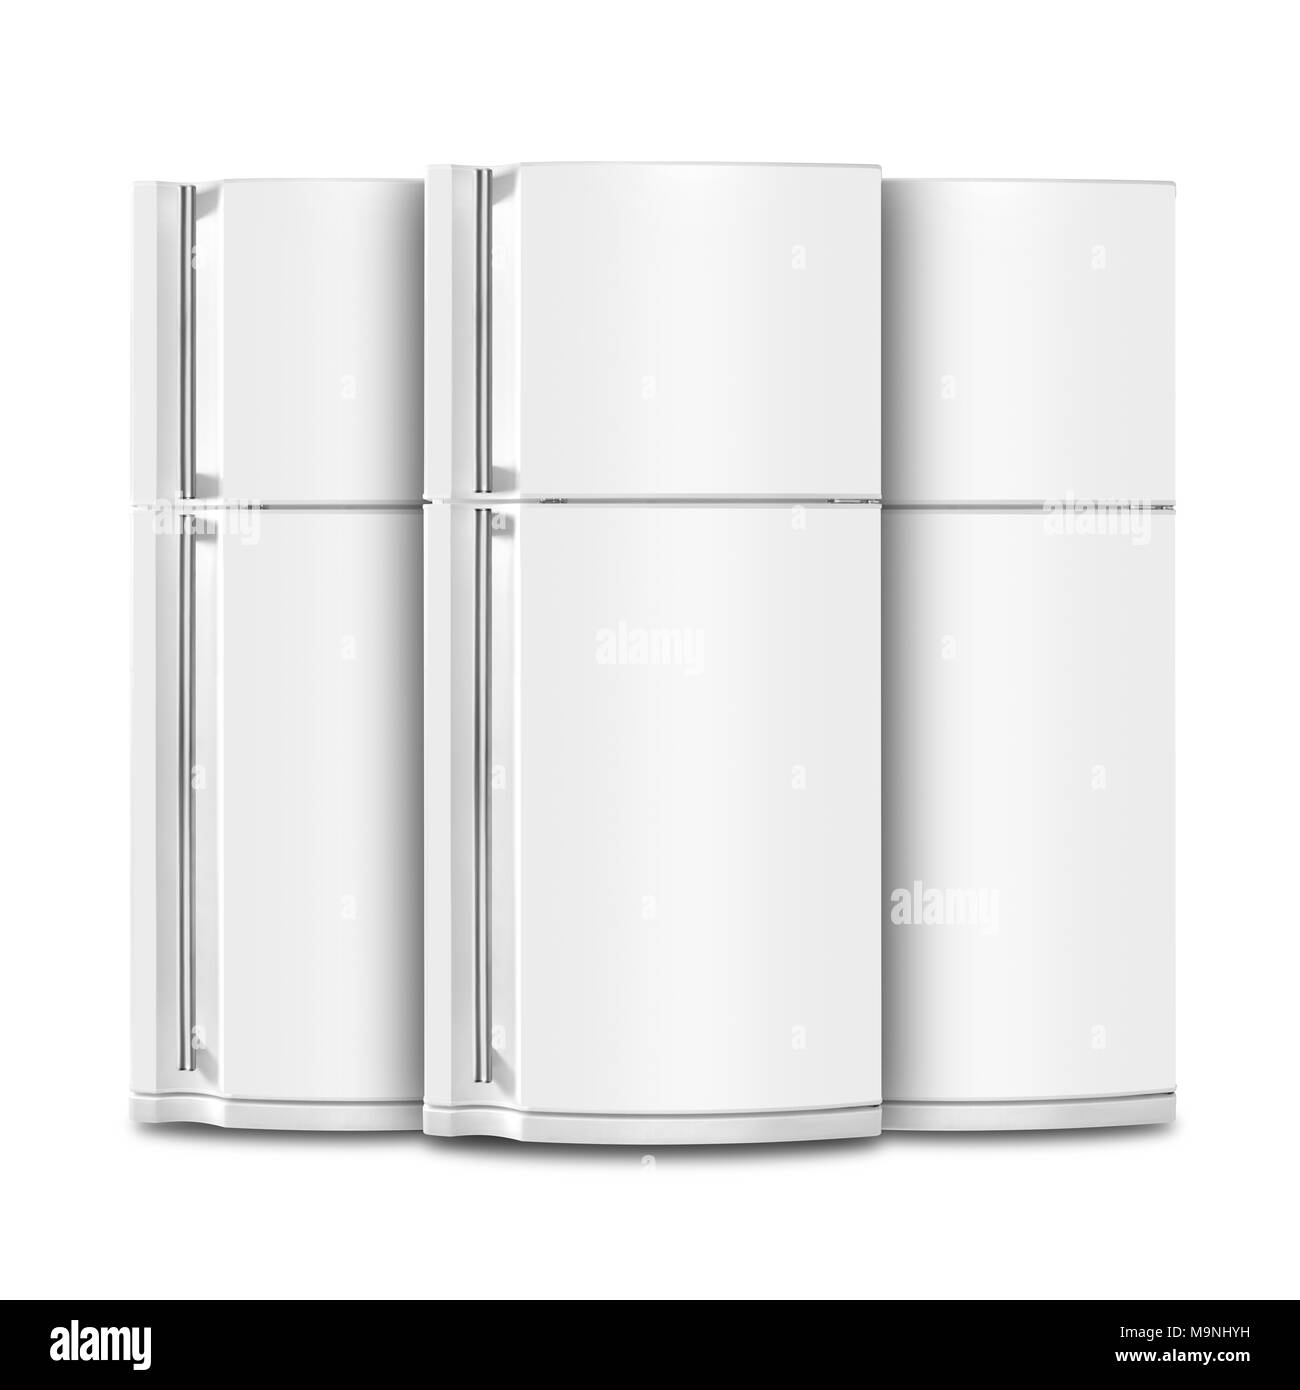 Fridge clean Black and White Stock Photos & Images - Alamy